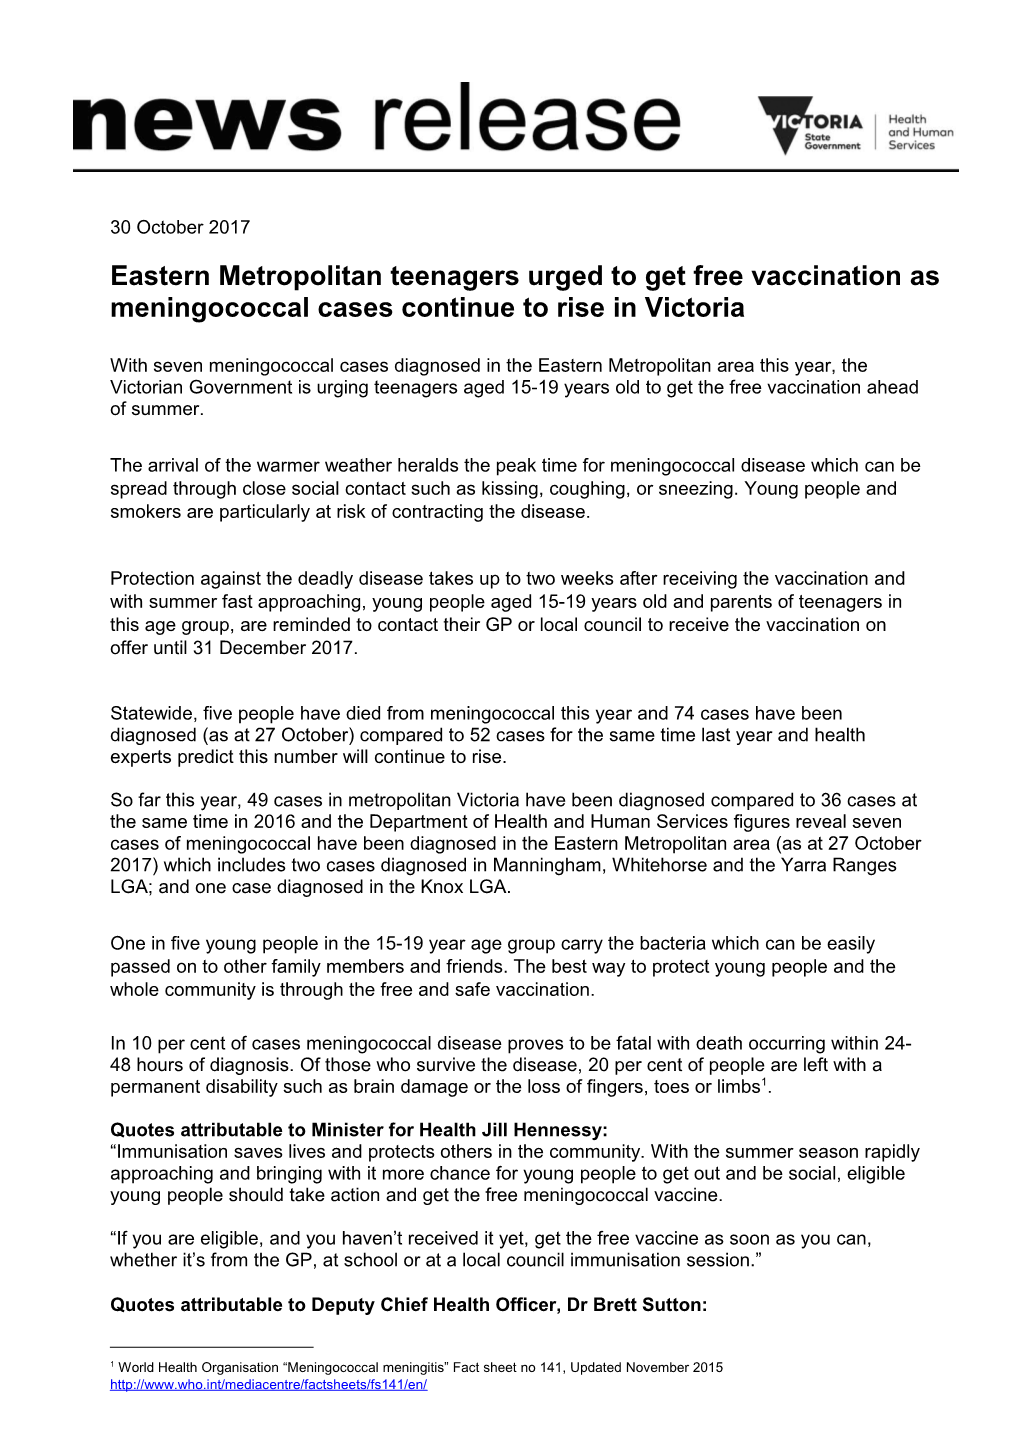 Eastern Metropolitan Teenagers Urged to Get Free Vaccination As Meningococcal Cases Continue